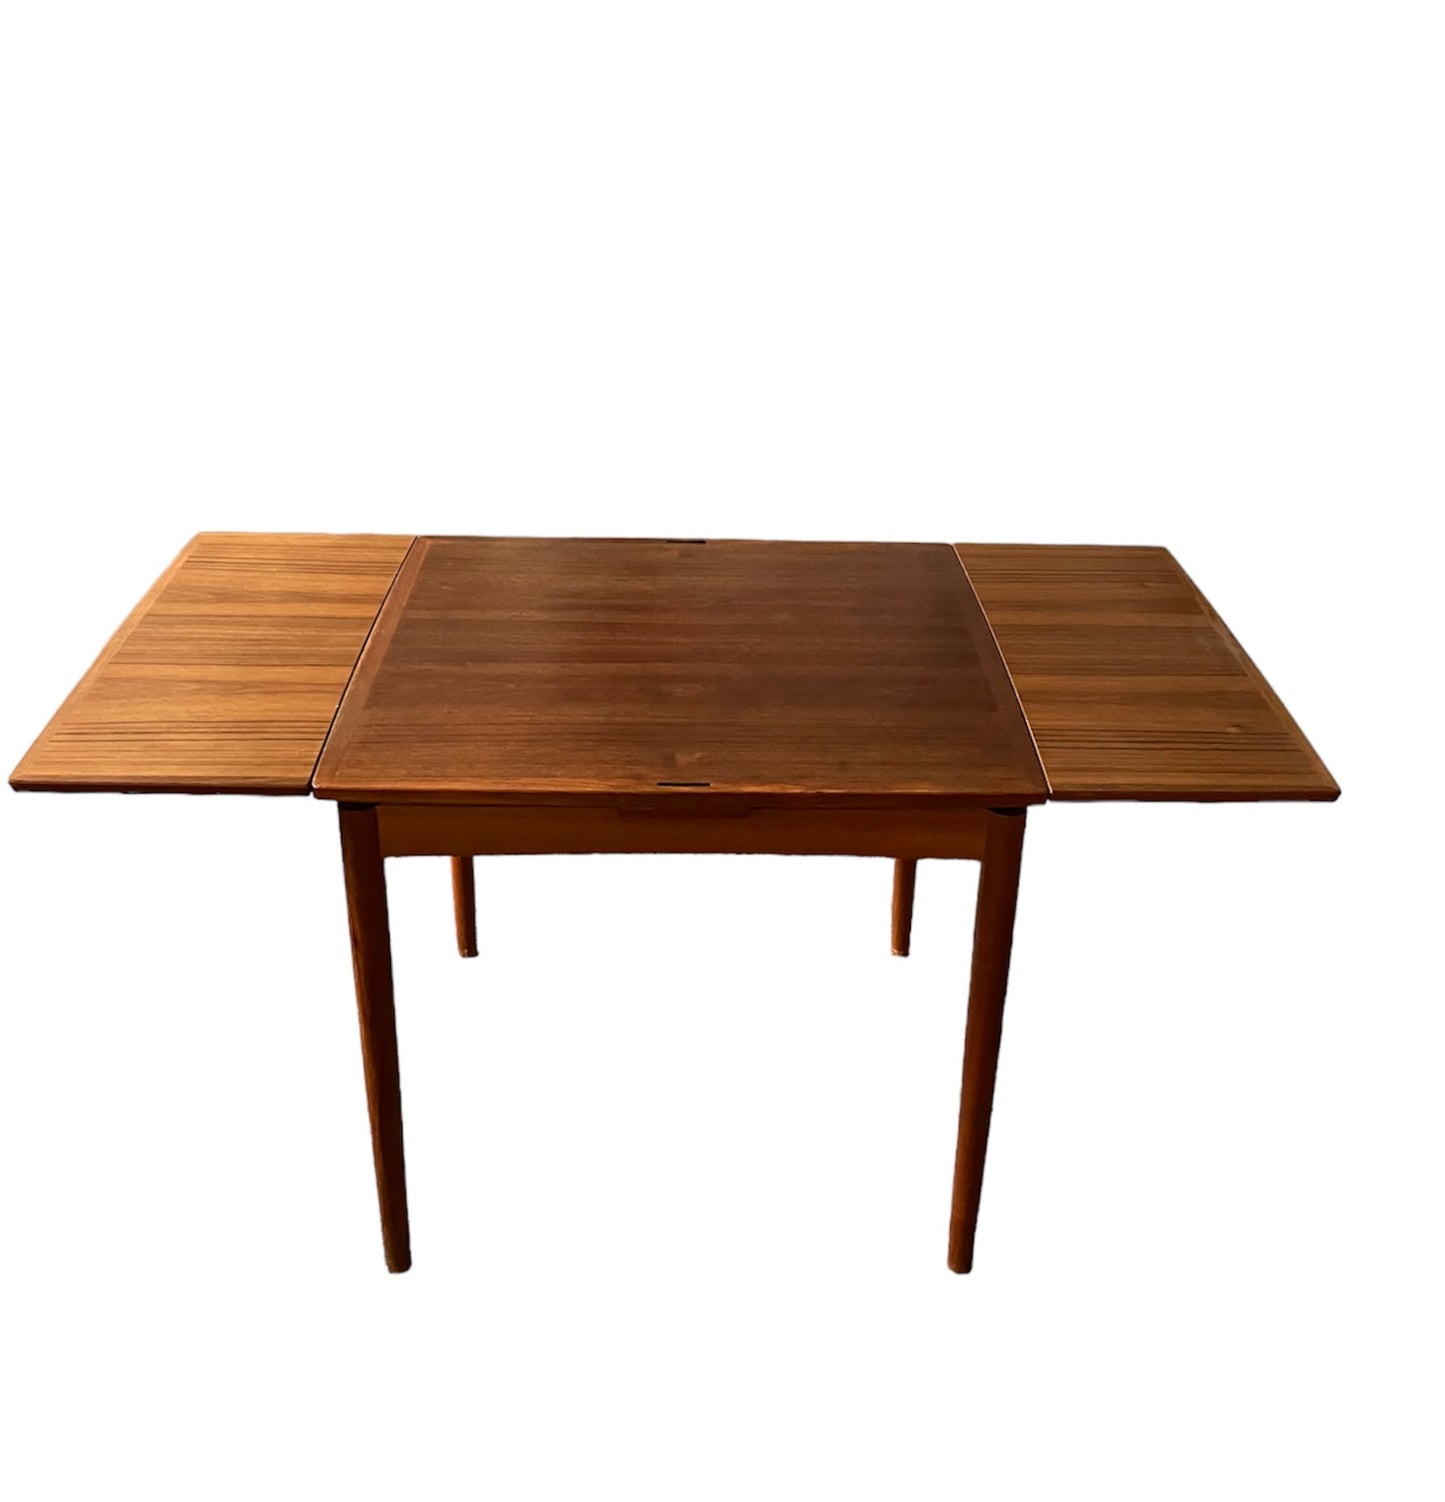 Game table with reversible top, Poul HUNDEVAD - 1960s